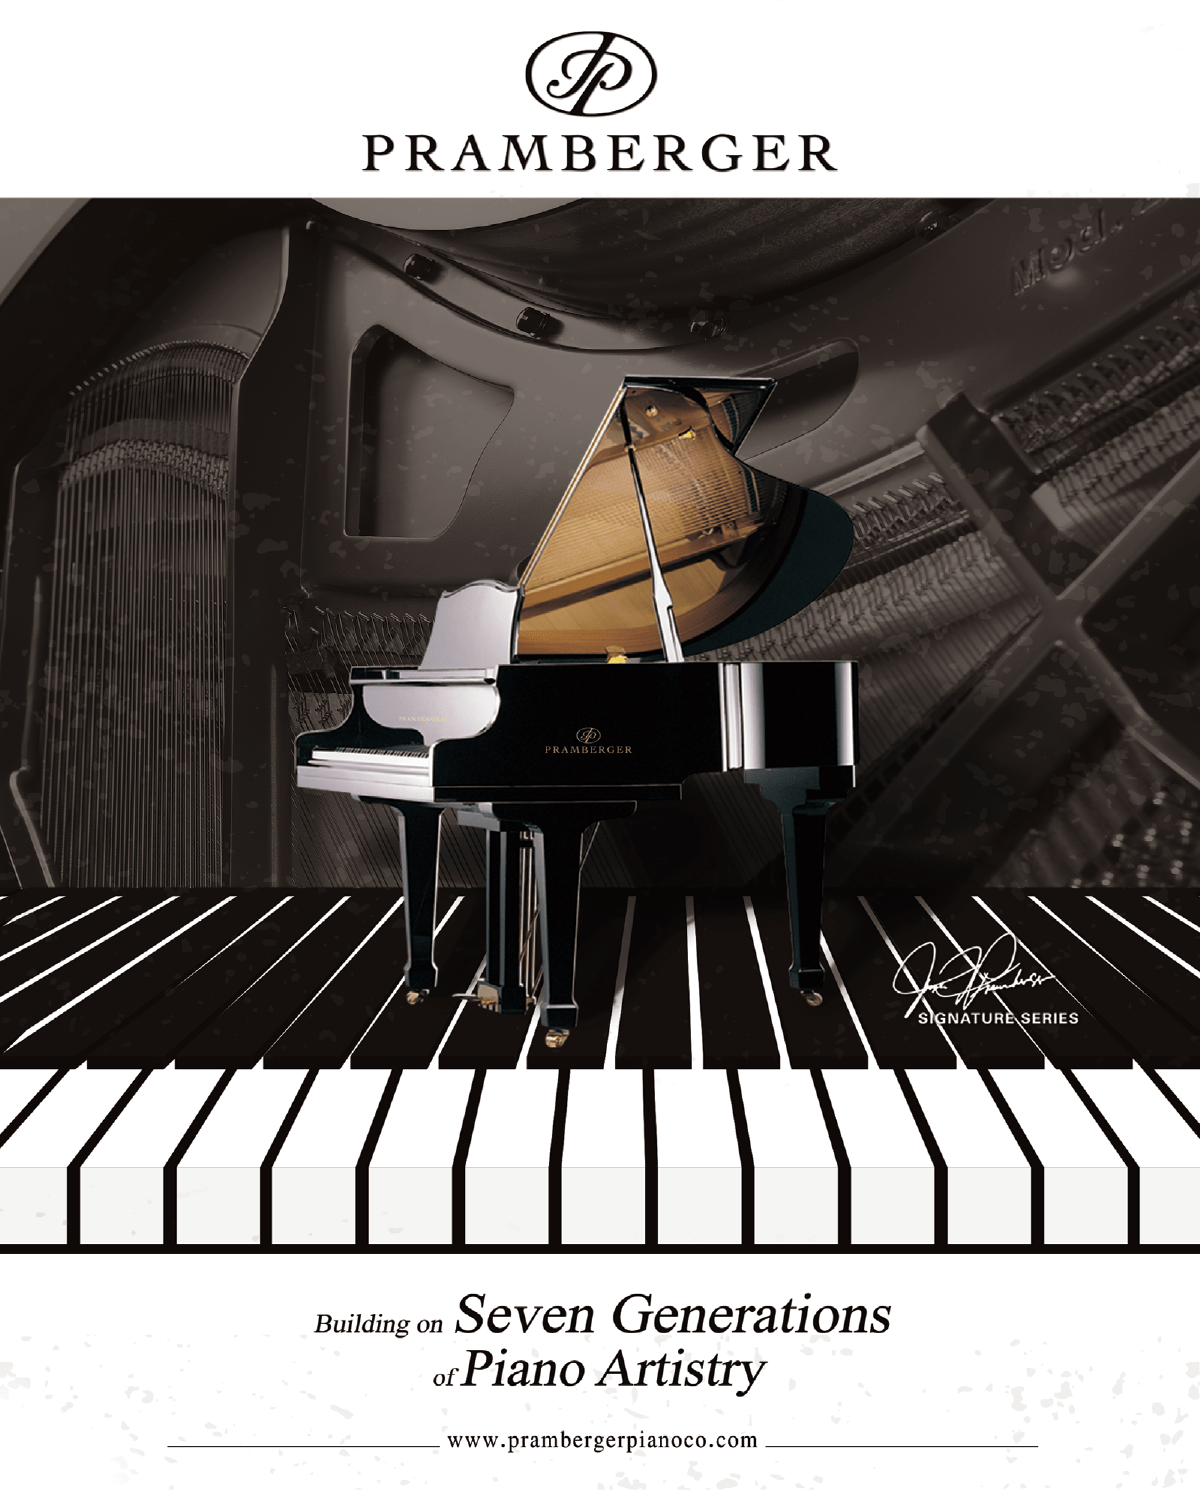 Pramberger, Building on Seven Generations of Piano Artistry